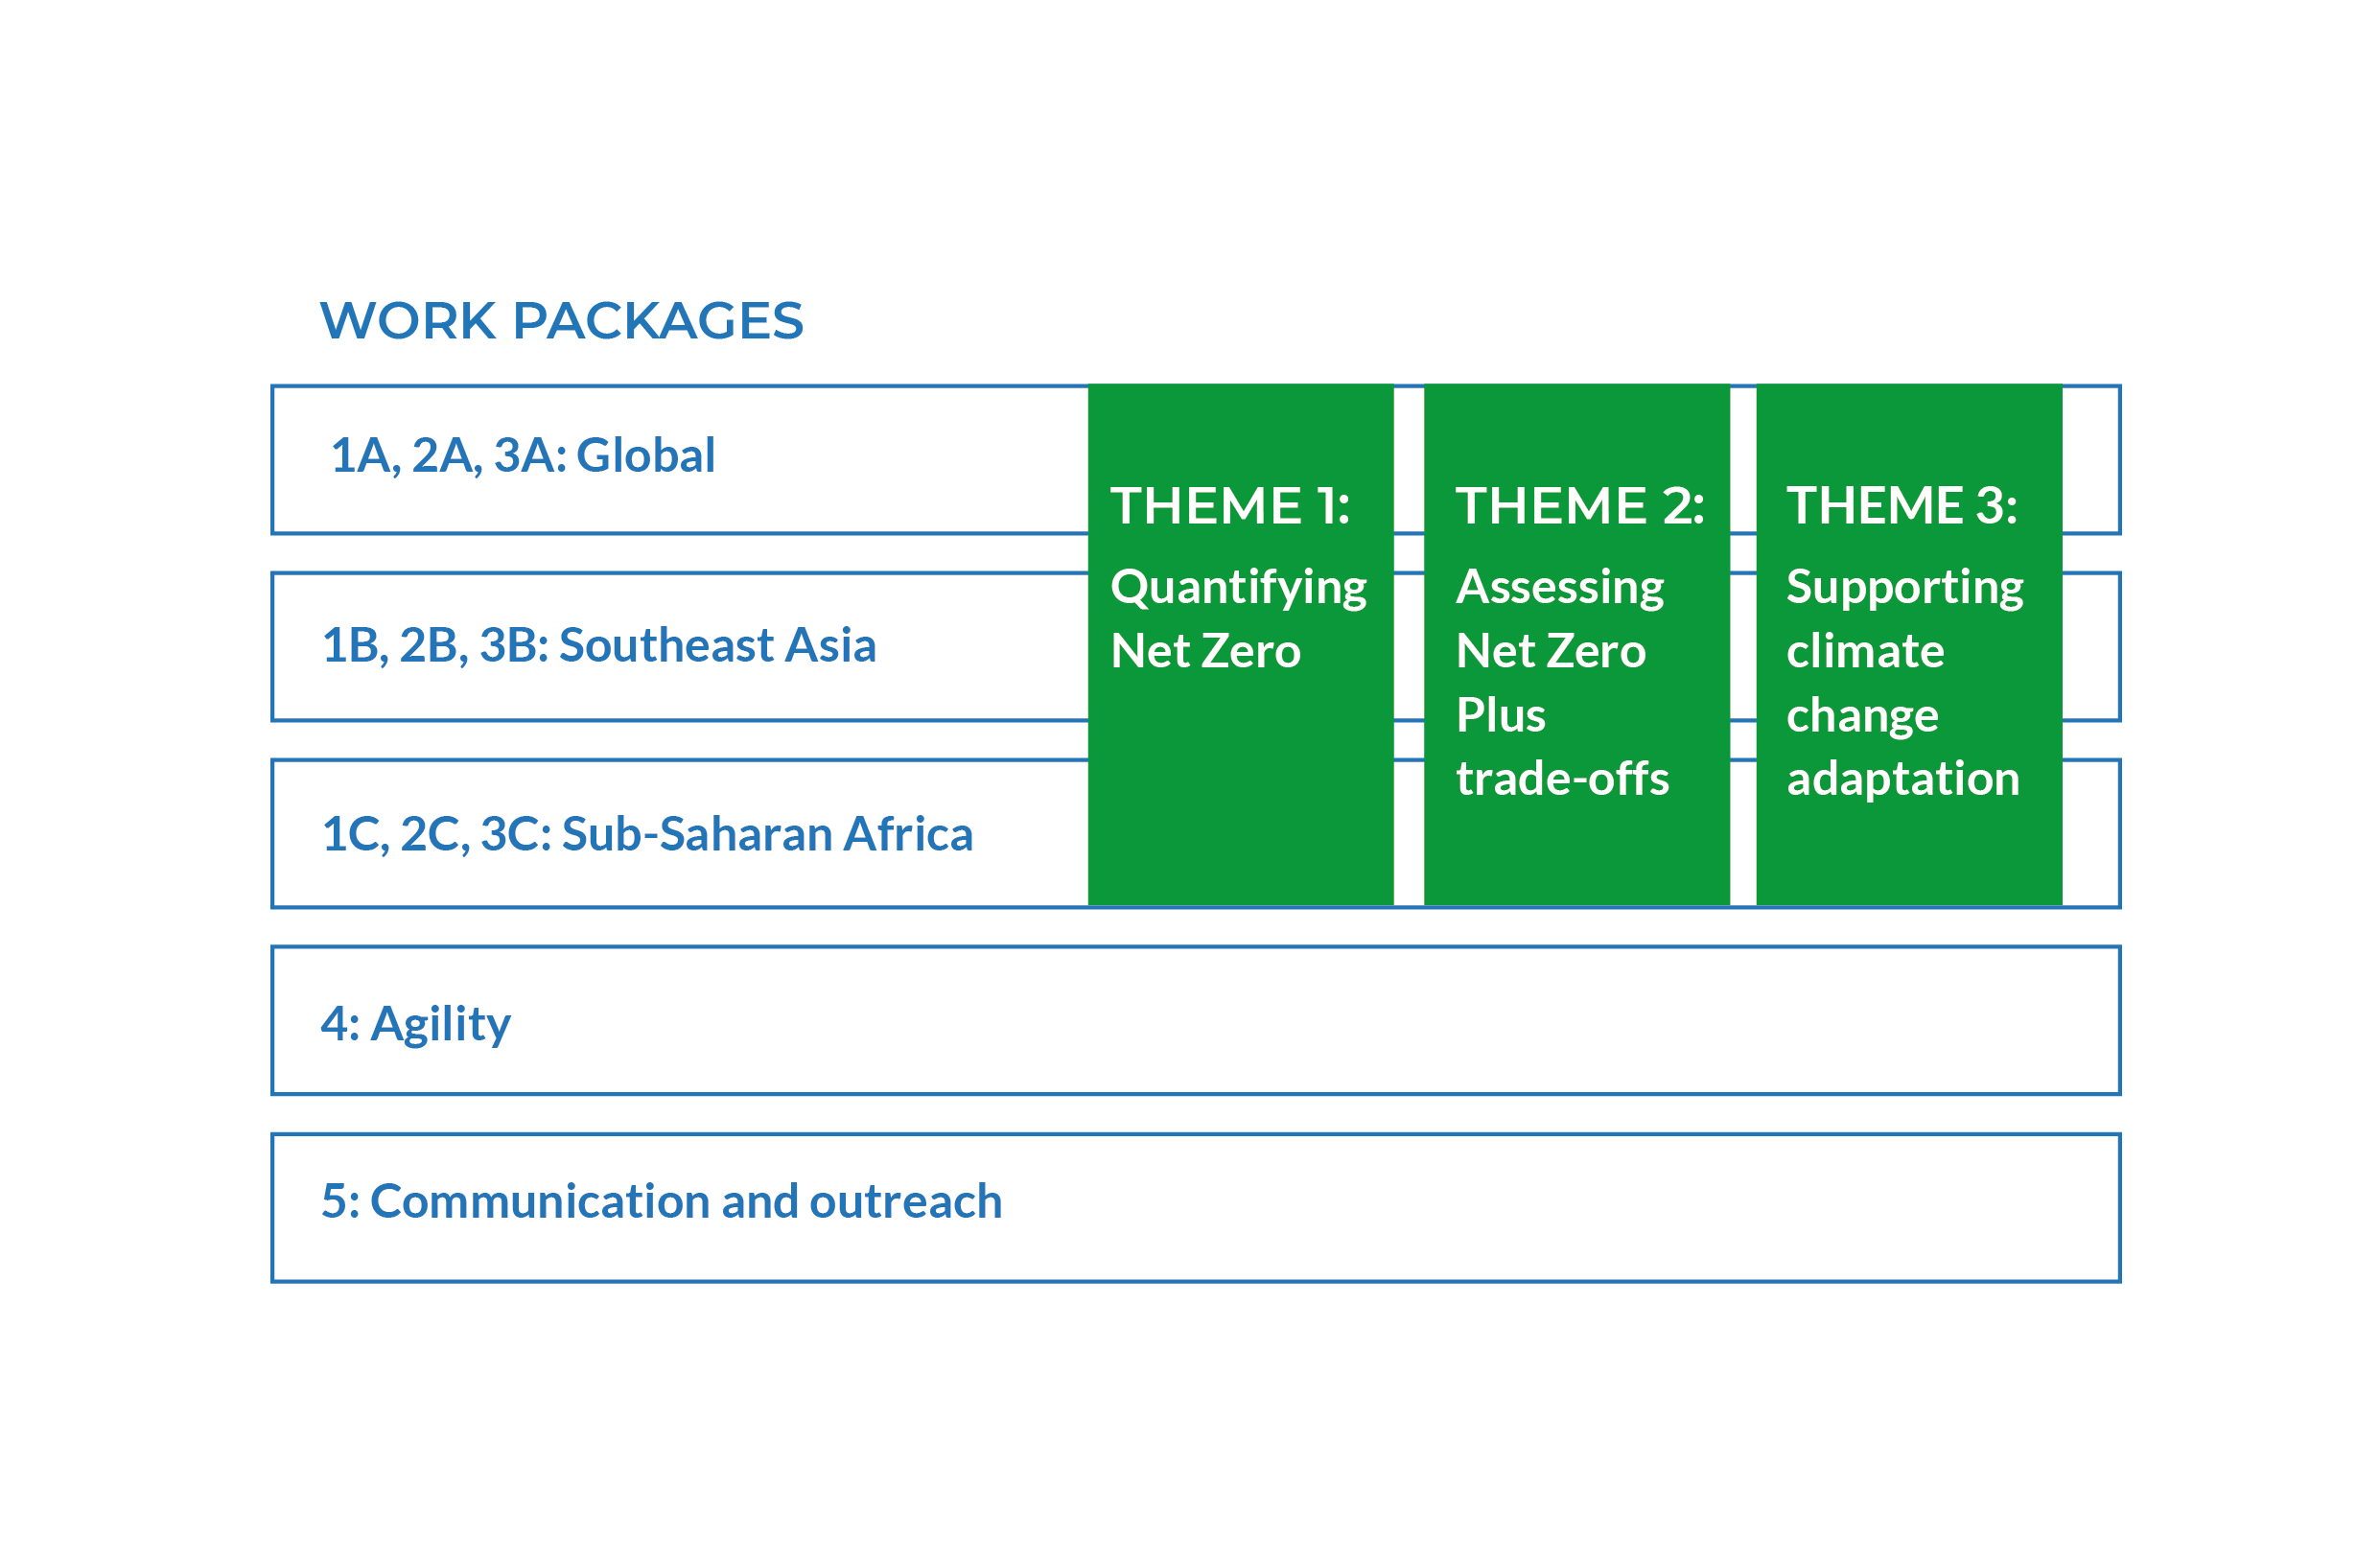 Table describing the three themes (quantifying net zero, assessing net zero plus trade offs and supporting climate change adaptation) and nine work packages of the NC international project